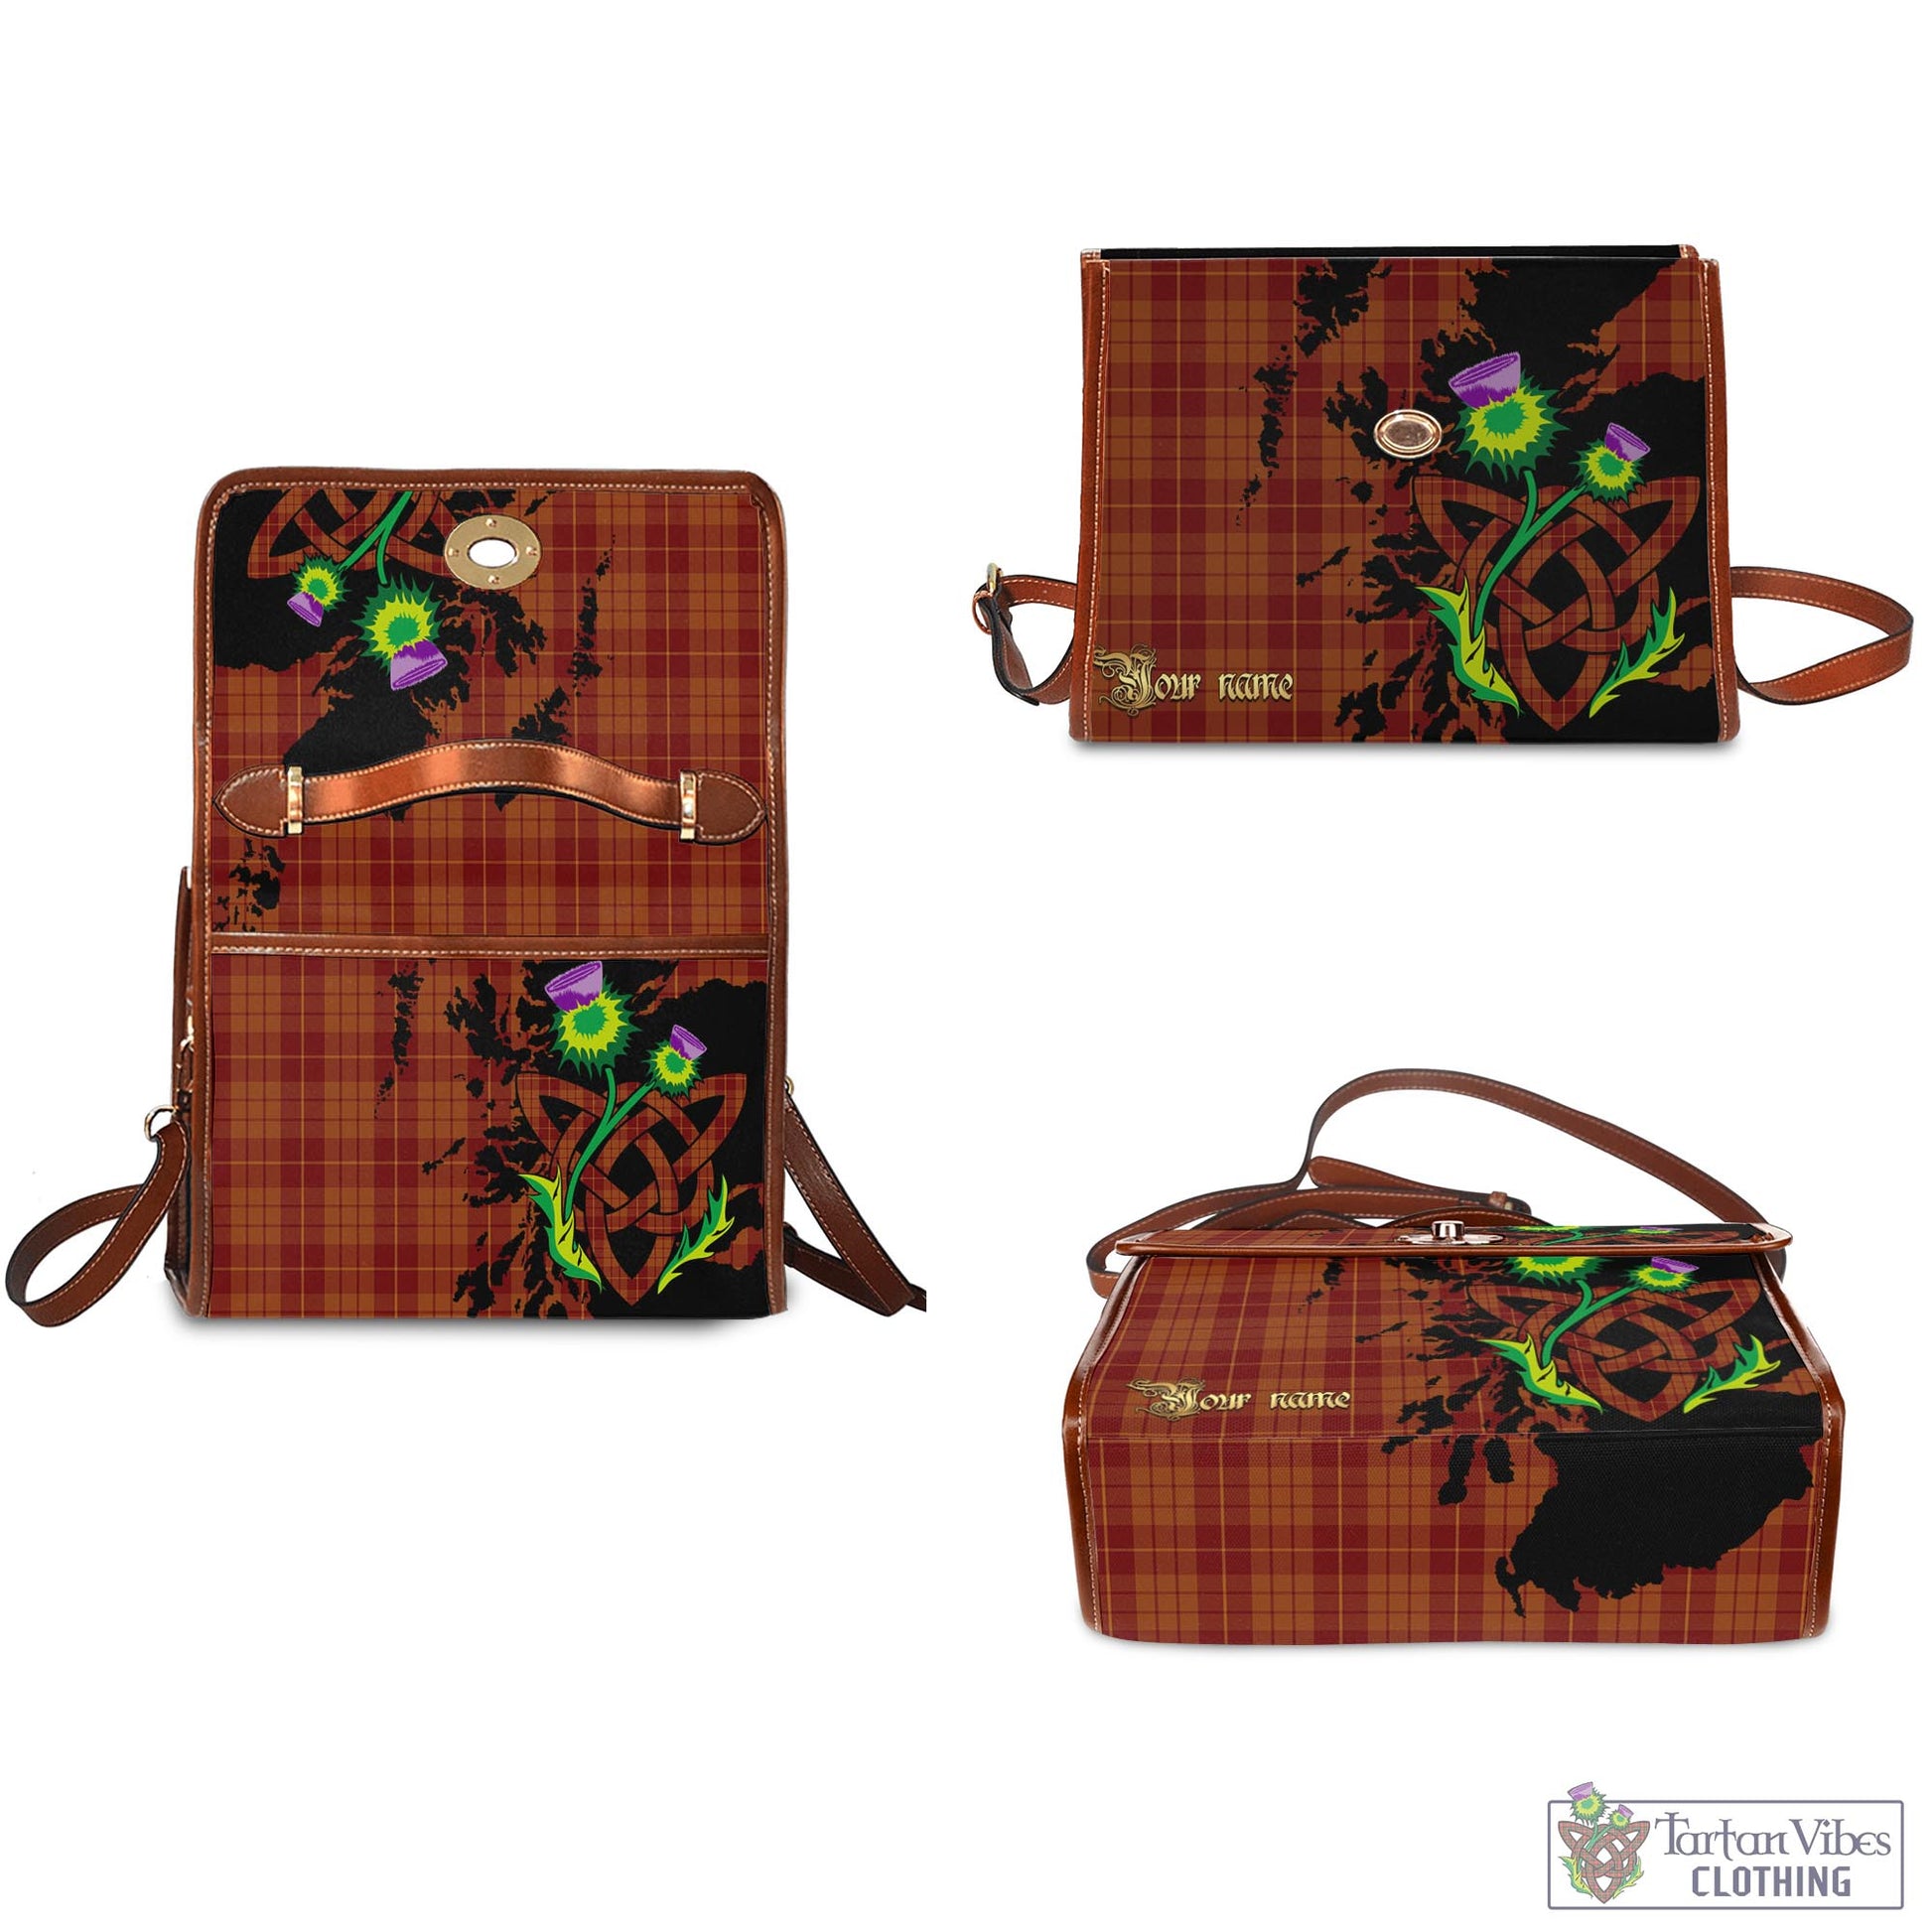 Tartan Vibes Clothing Hamilton Red Tartan Waterproof Canvas Bag with Scotland Map and Thistle Celtic Accents